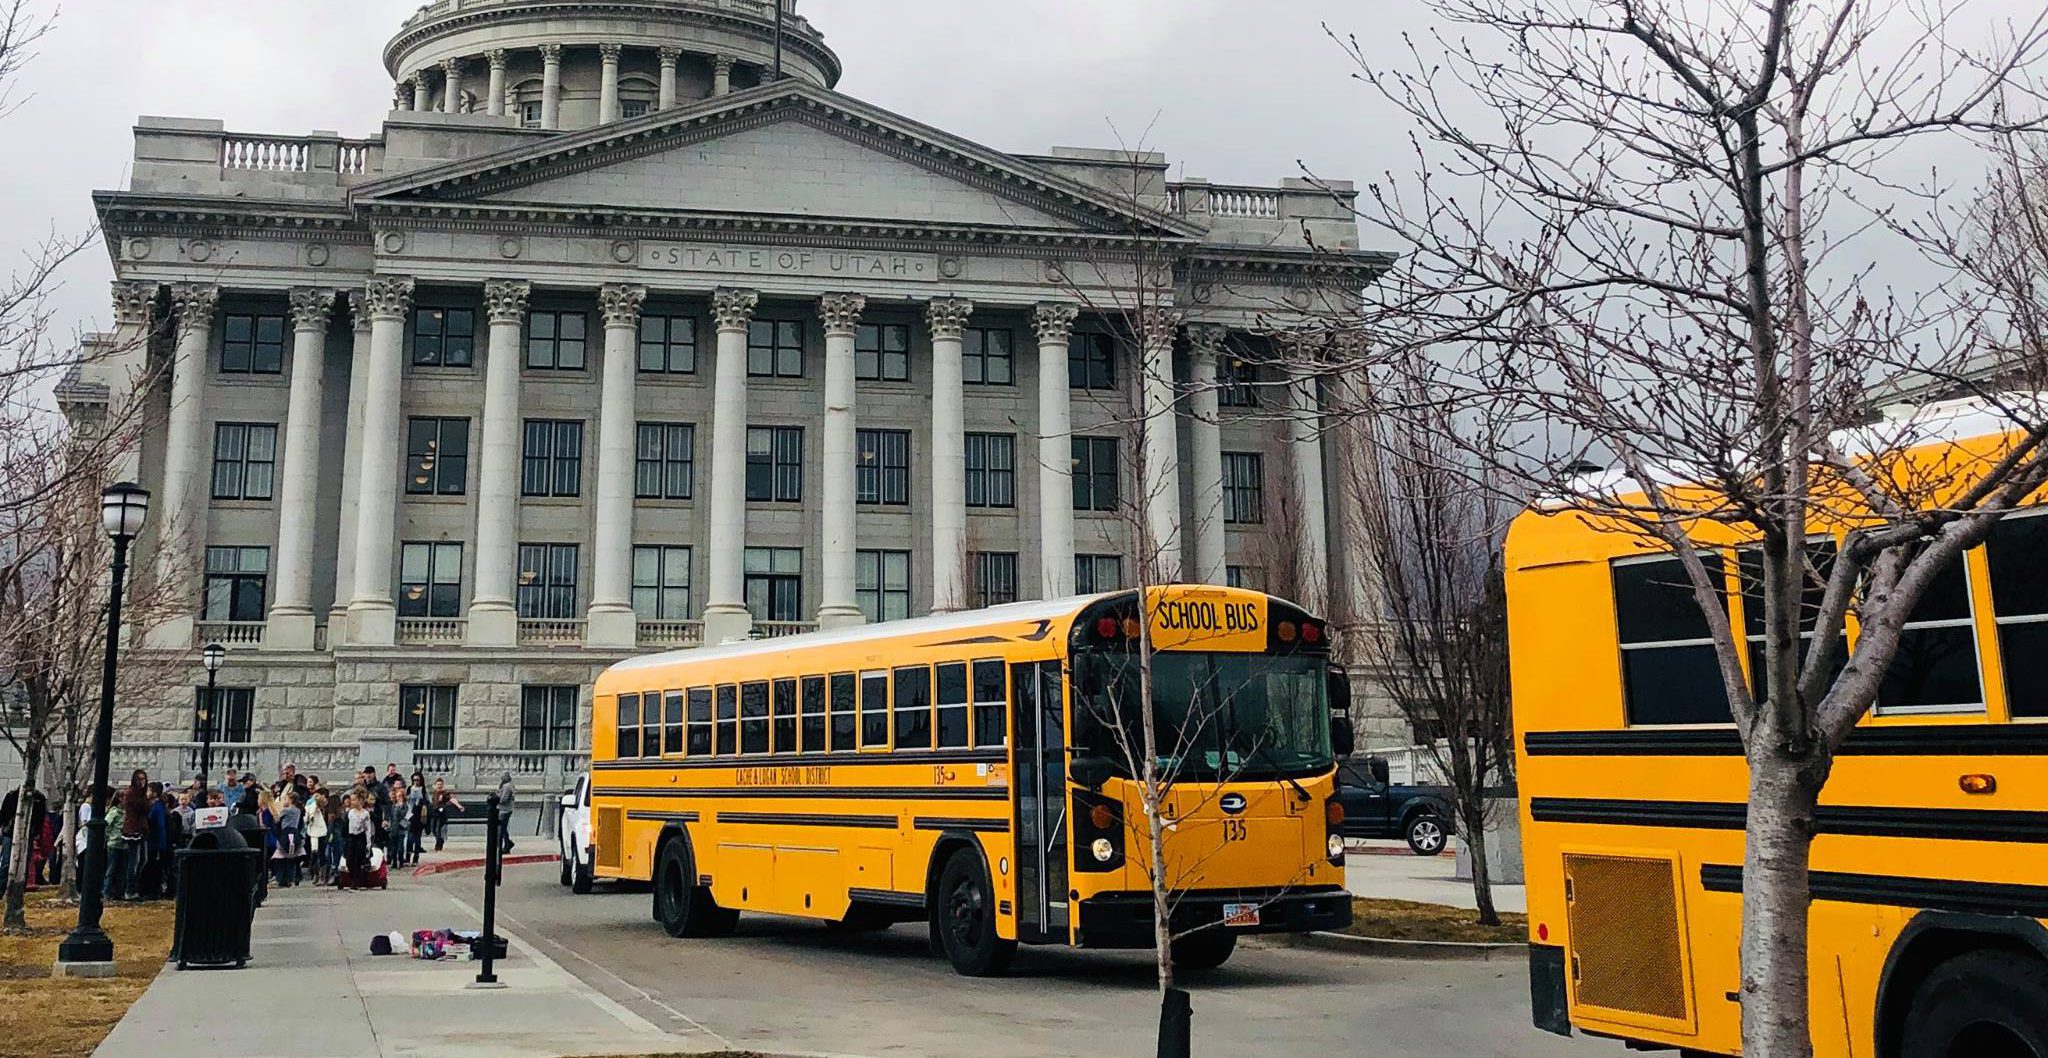 School busses parked outside the Utah State Capitol